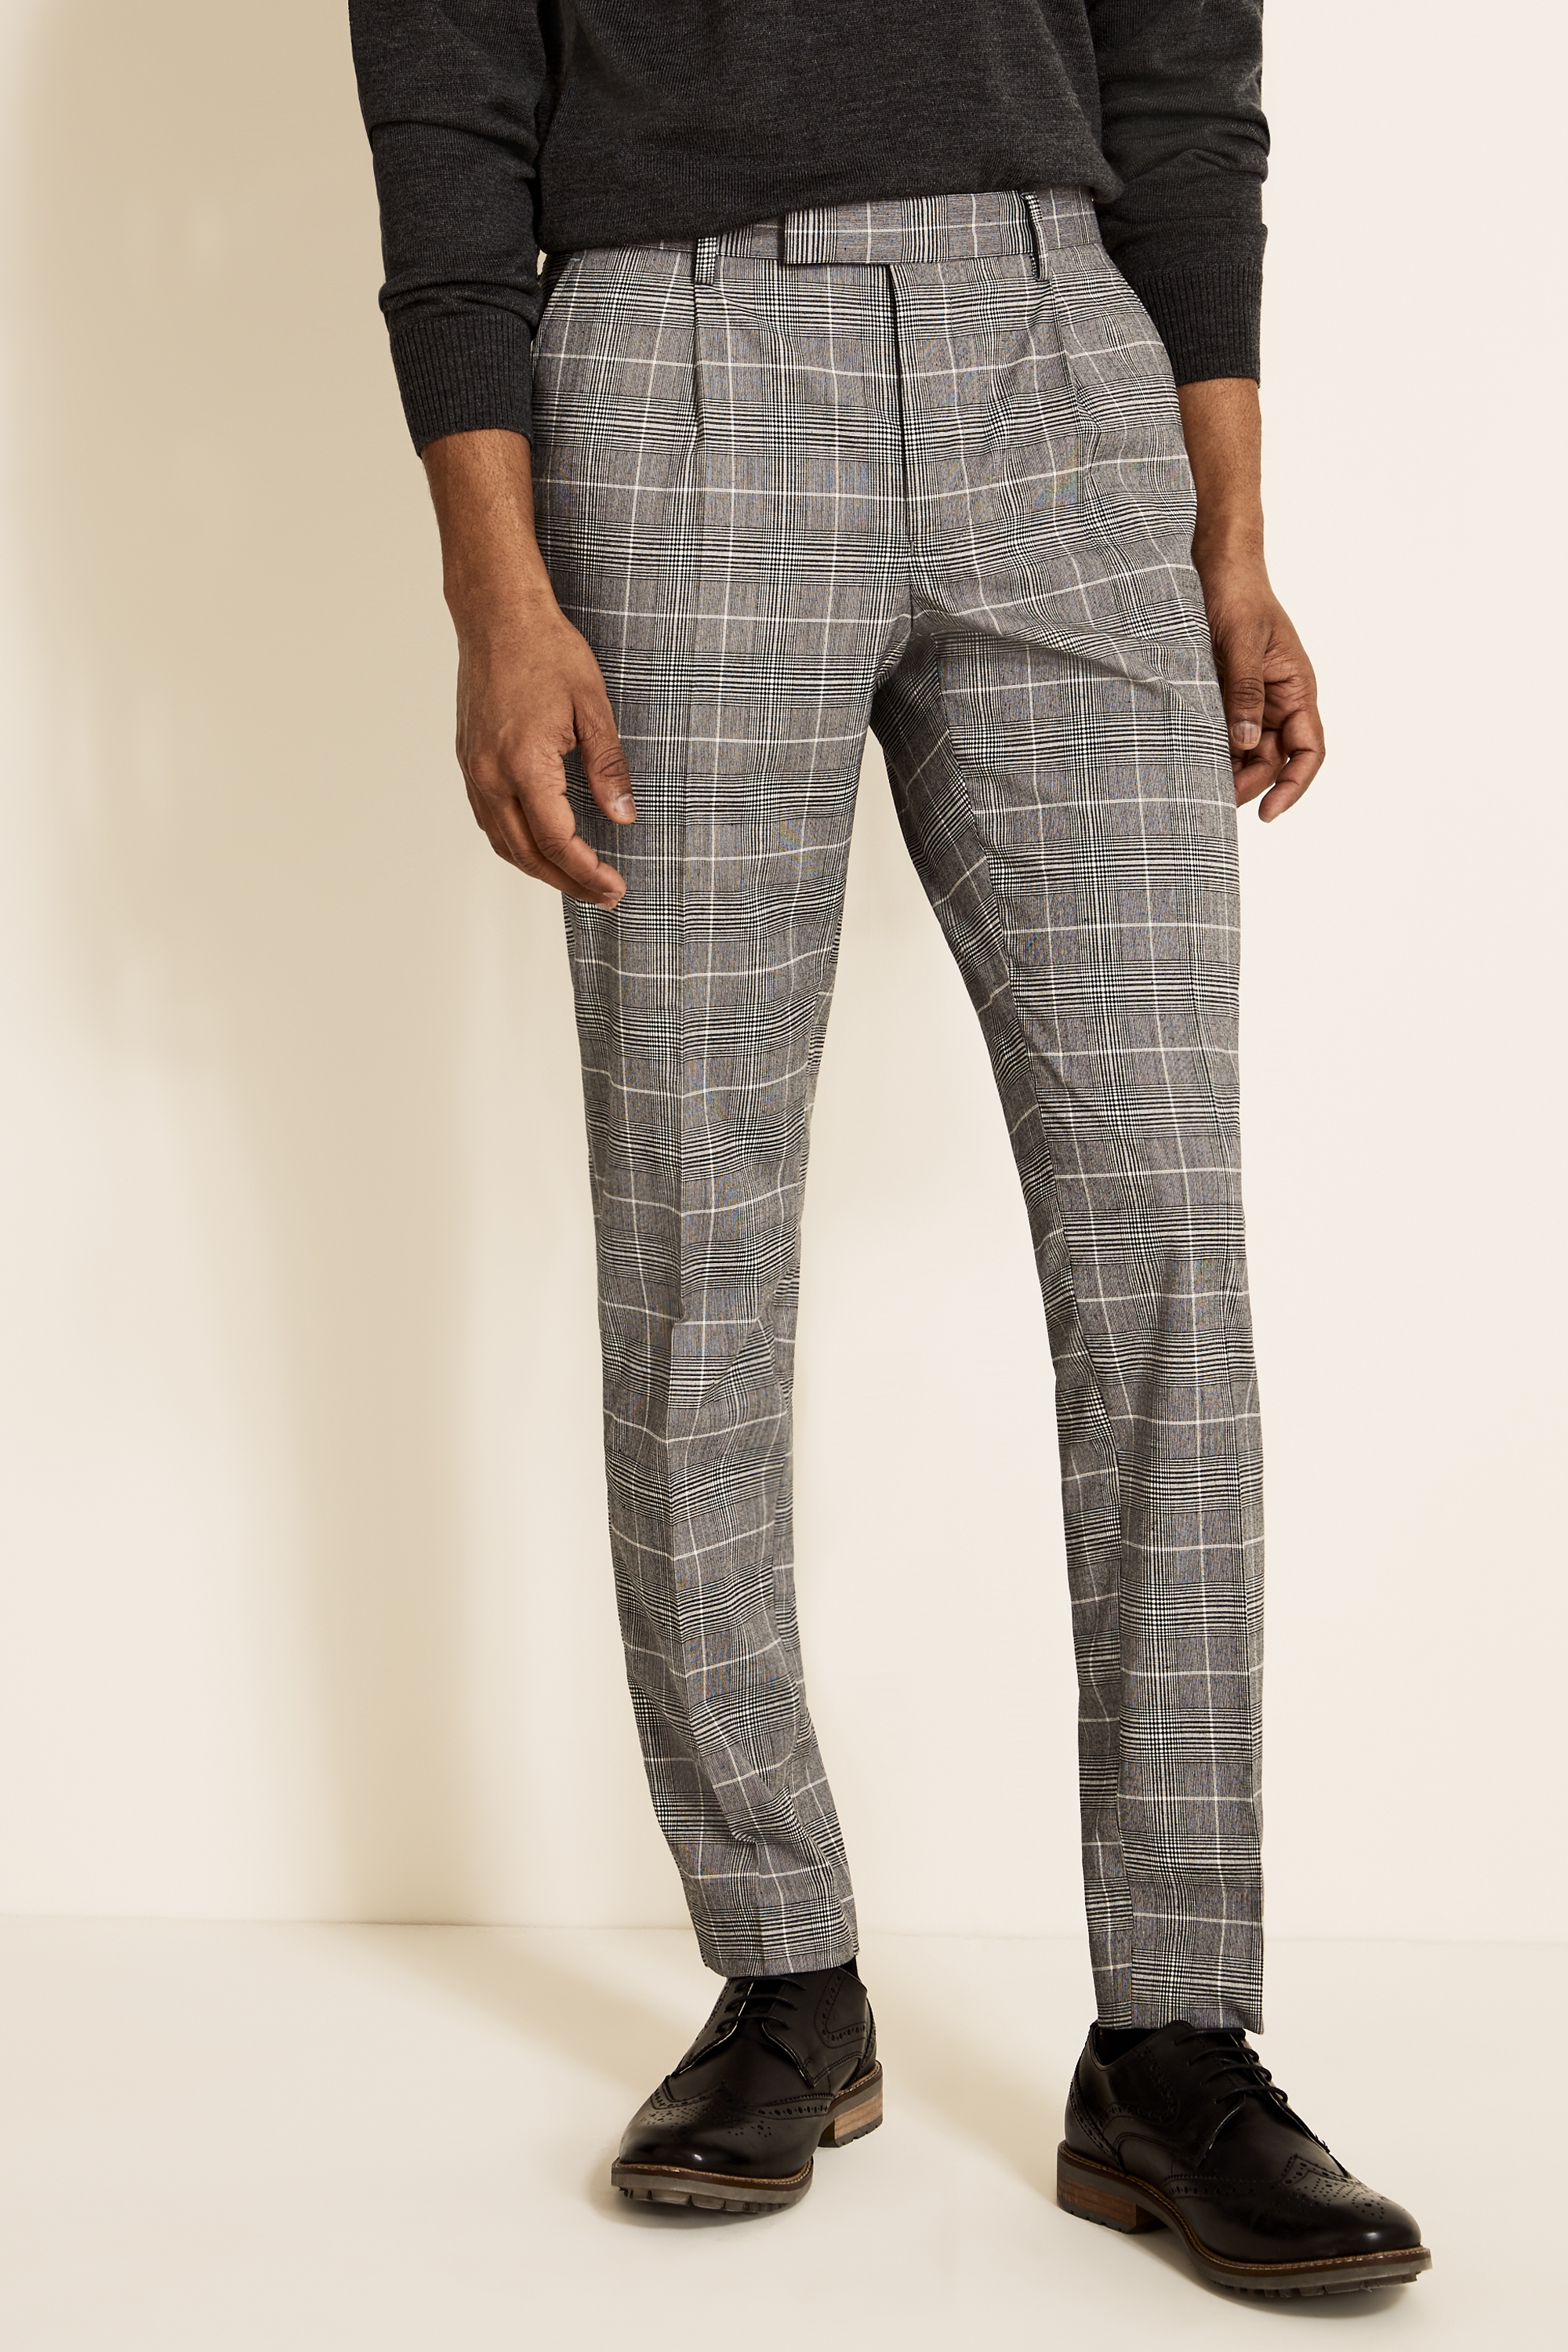 Moss London Slim Fit Black & White Prince Of Wales Check Cropped Pant